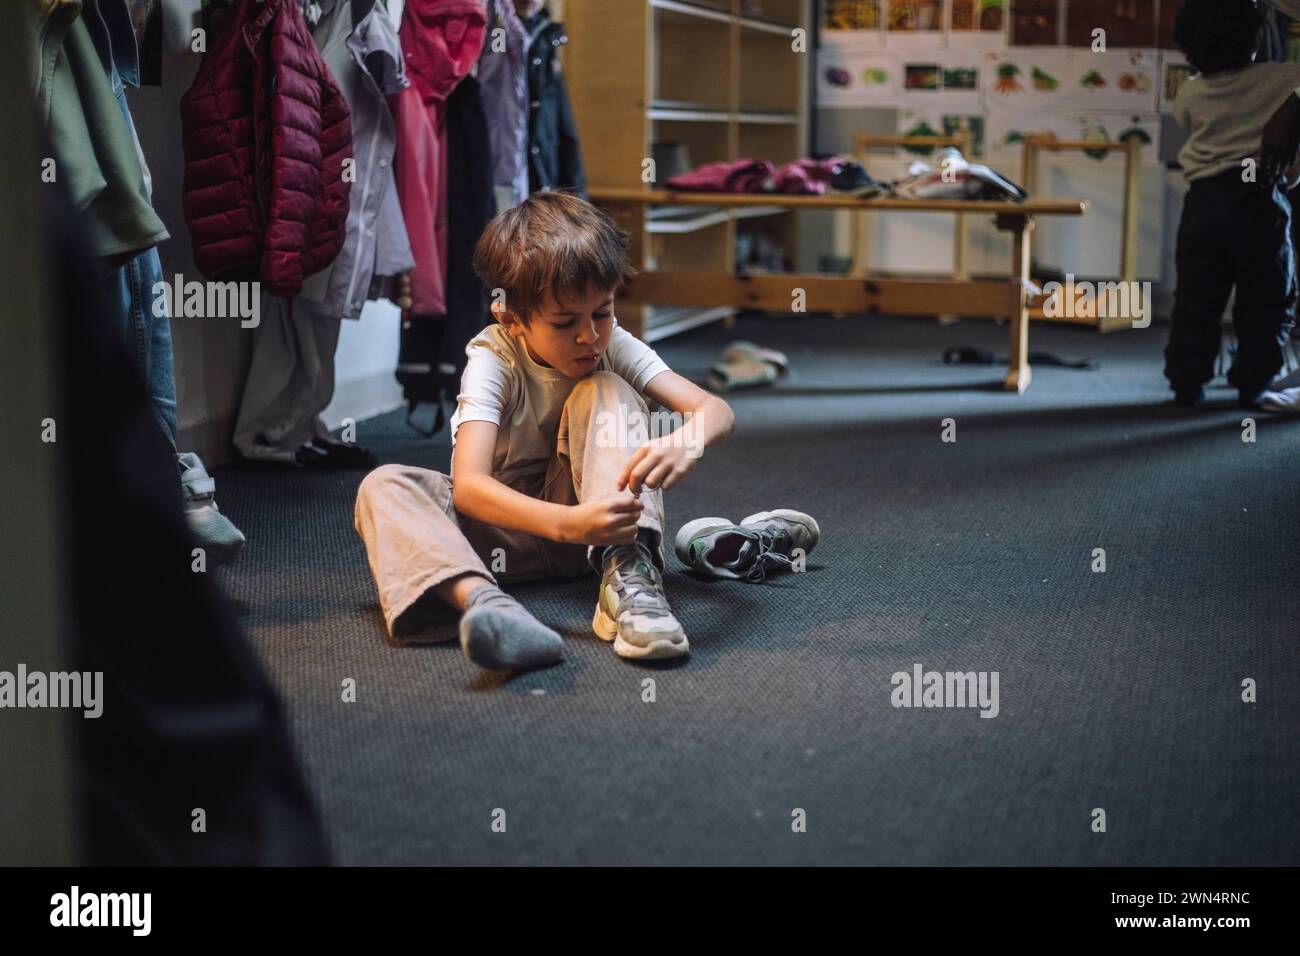 Boy tying shoelace while sitting on floor in cloakroom at preschool Stock Photo